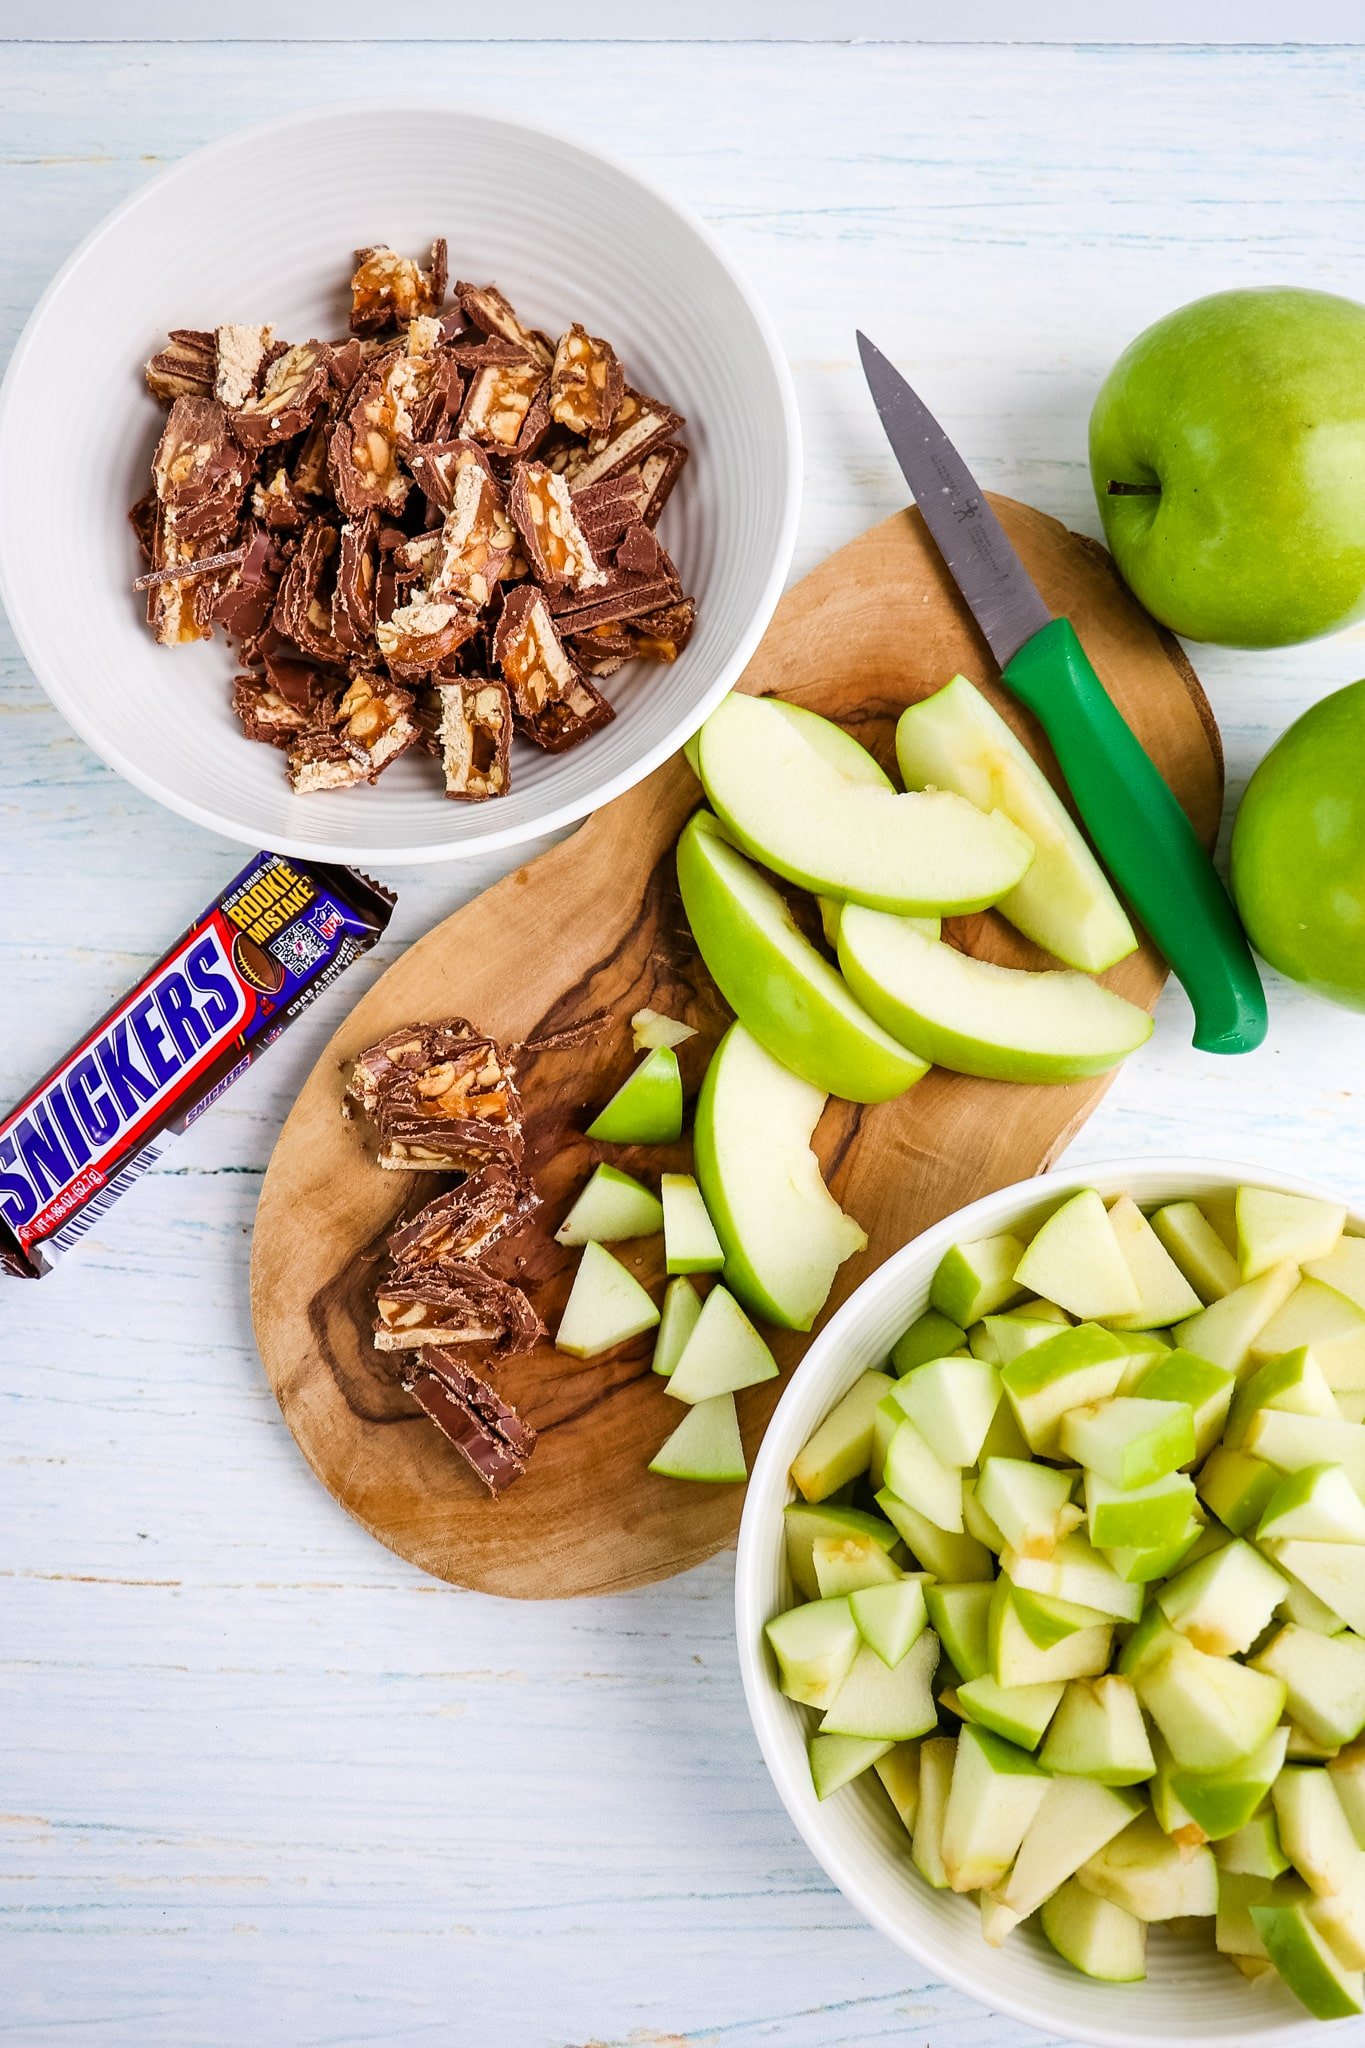 Chopped apples and Snickers bars for Snickers apple salad.